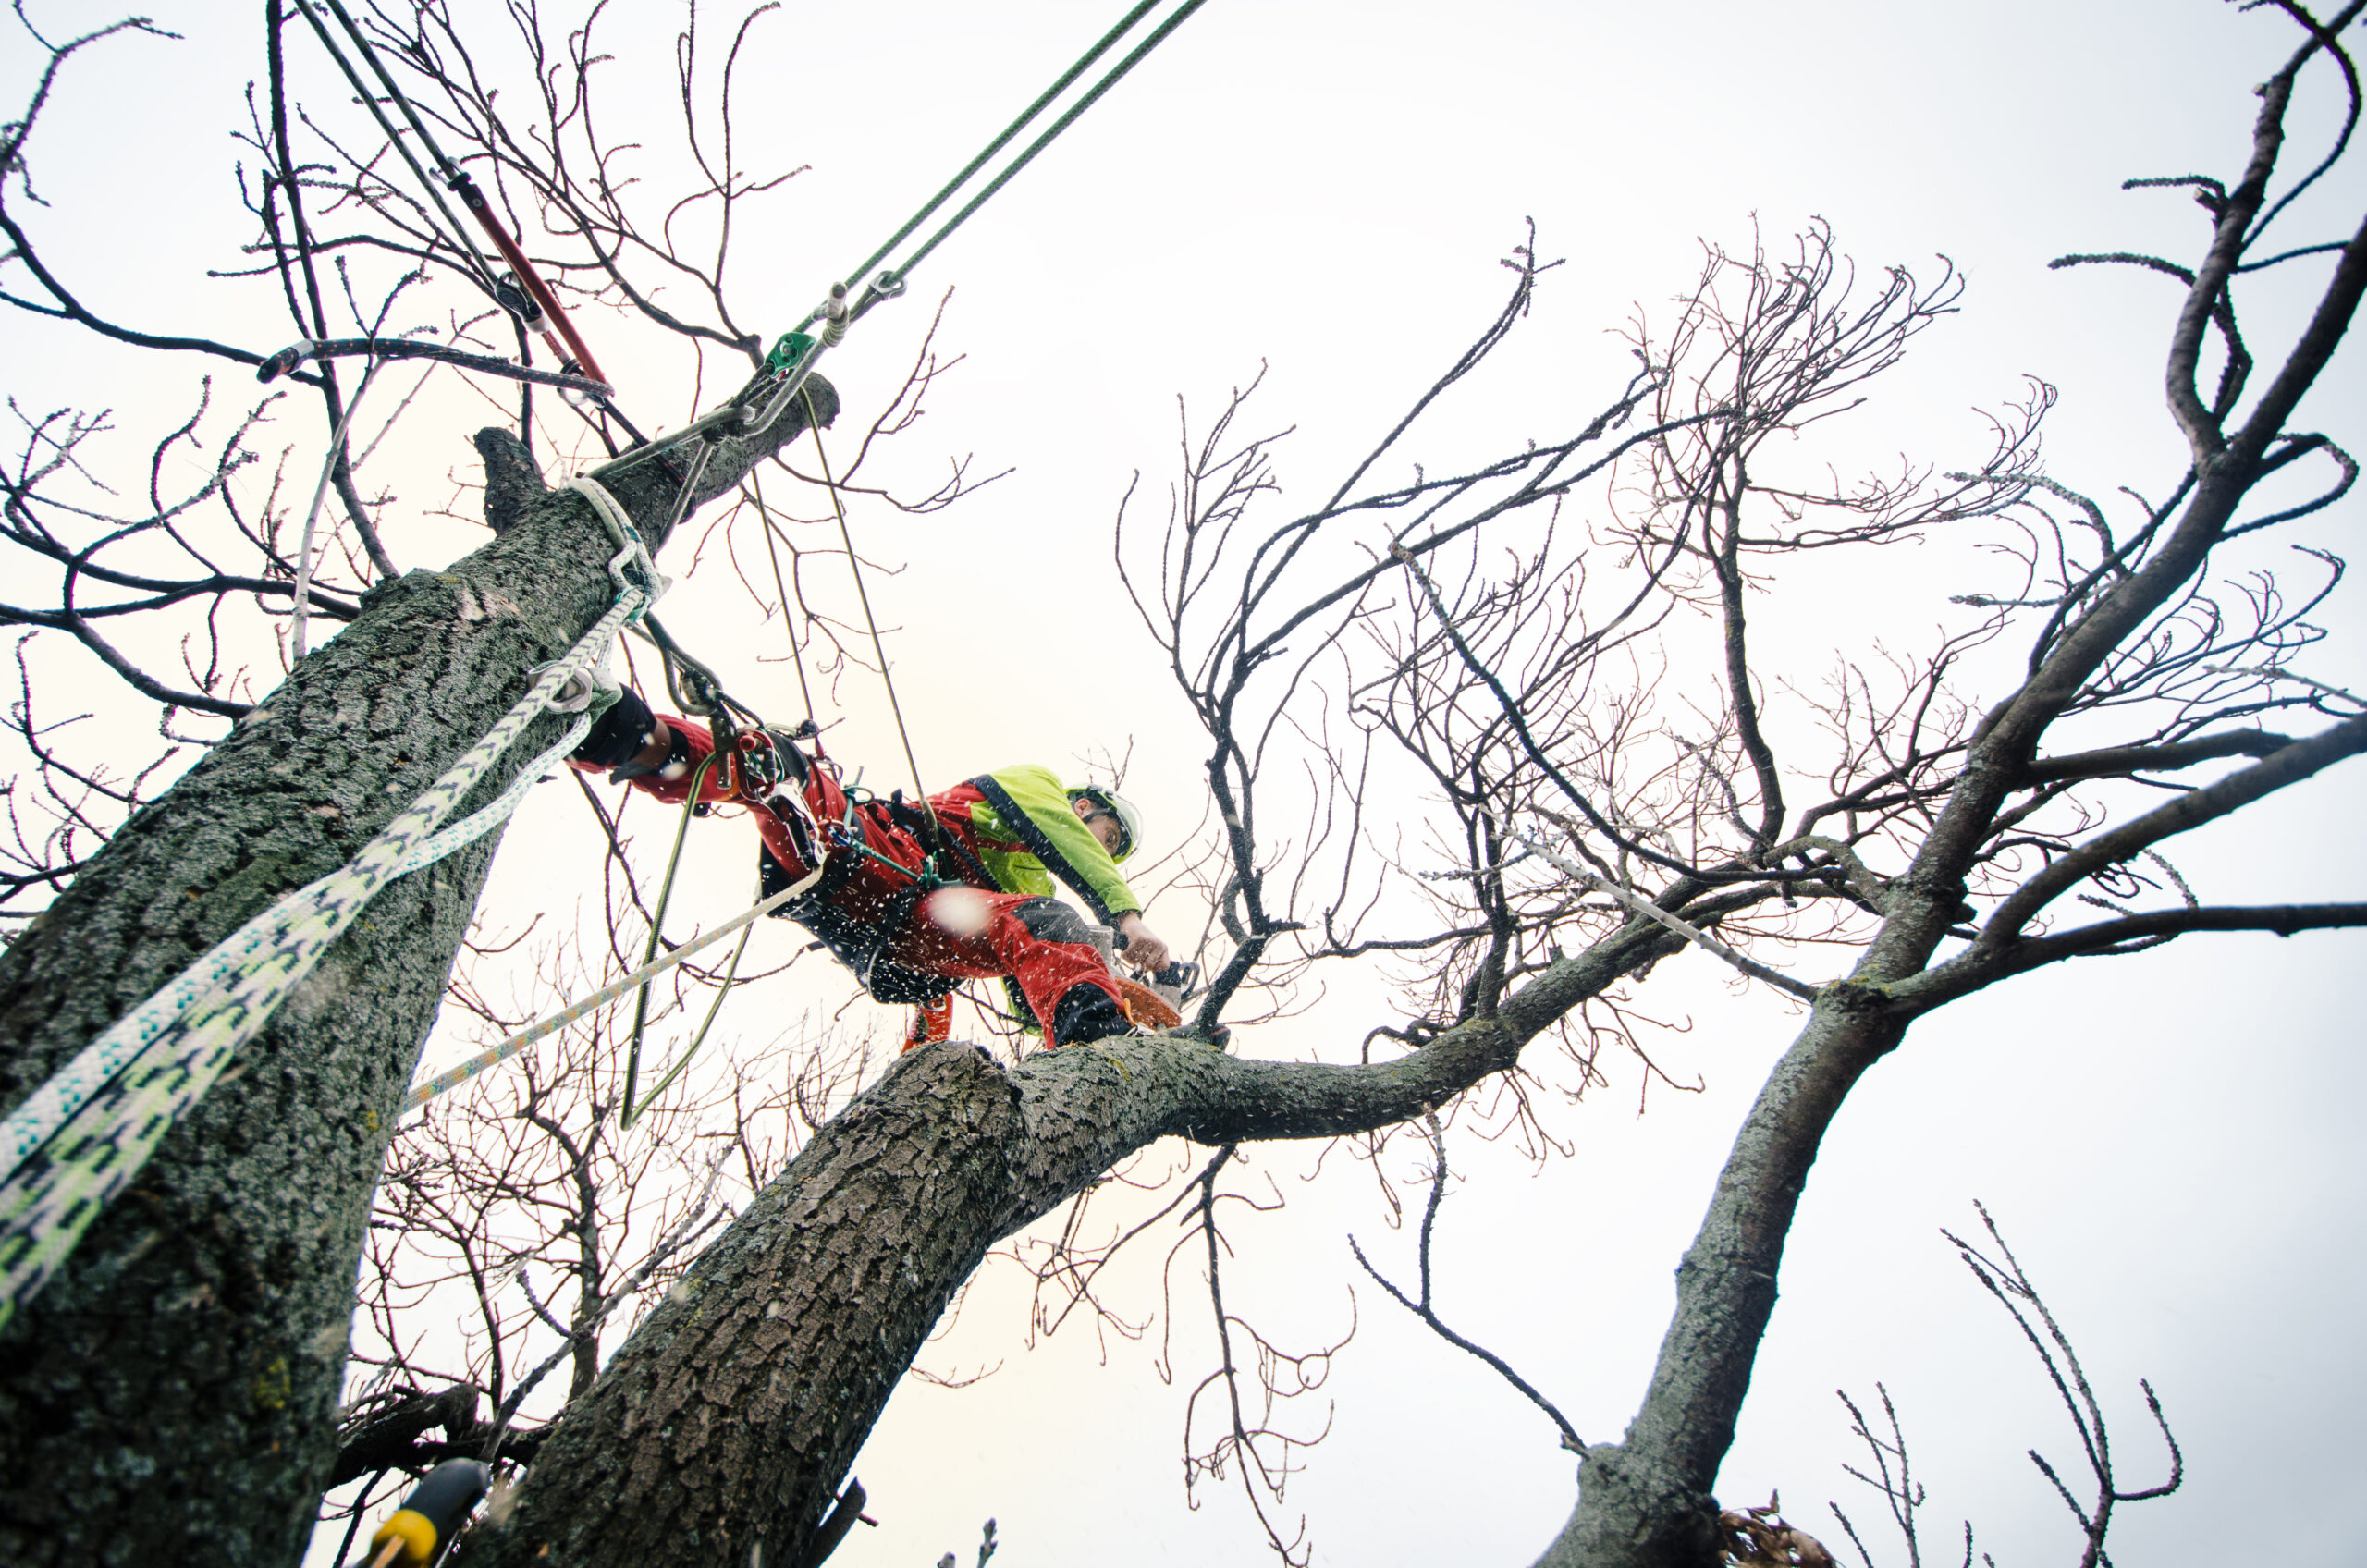 A tree surgeon between two trees cutting a tree branch.